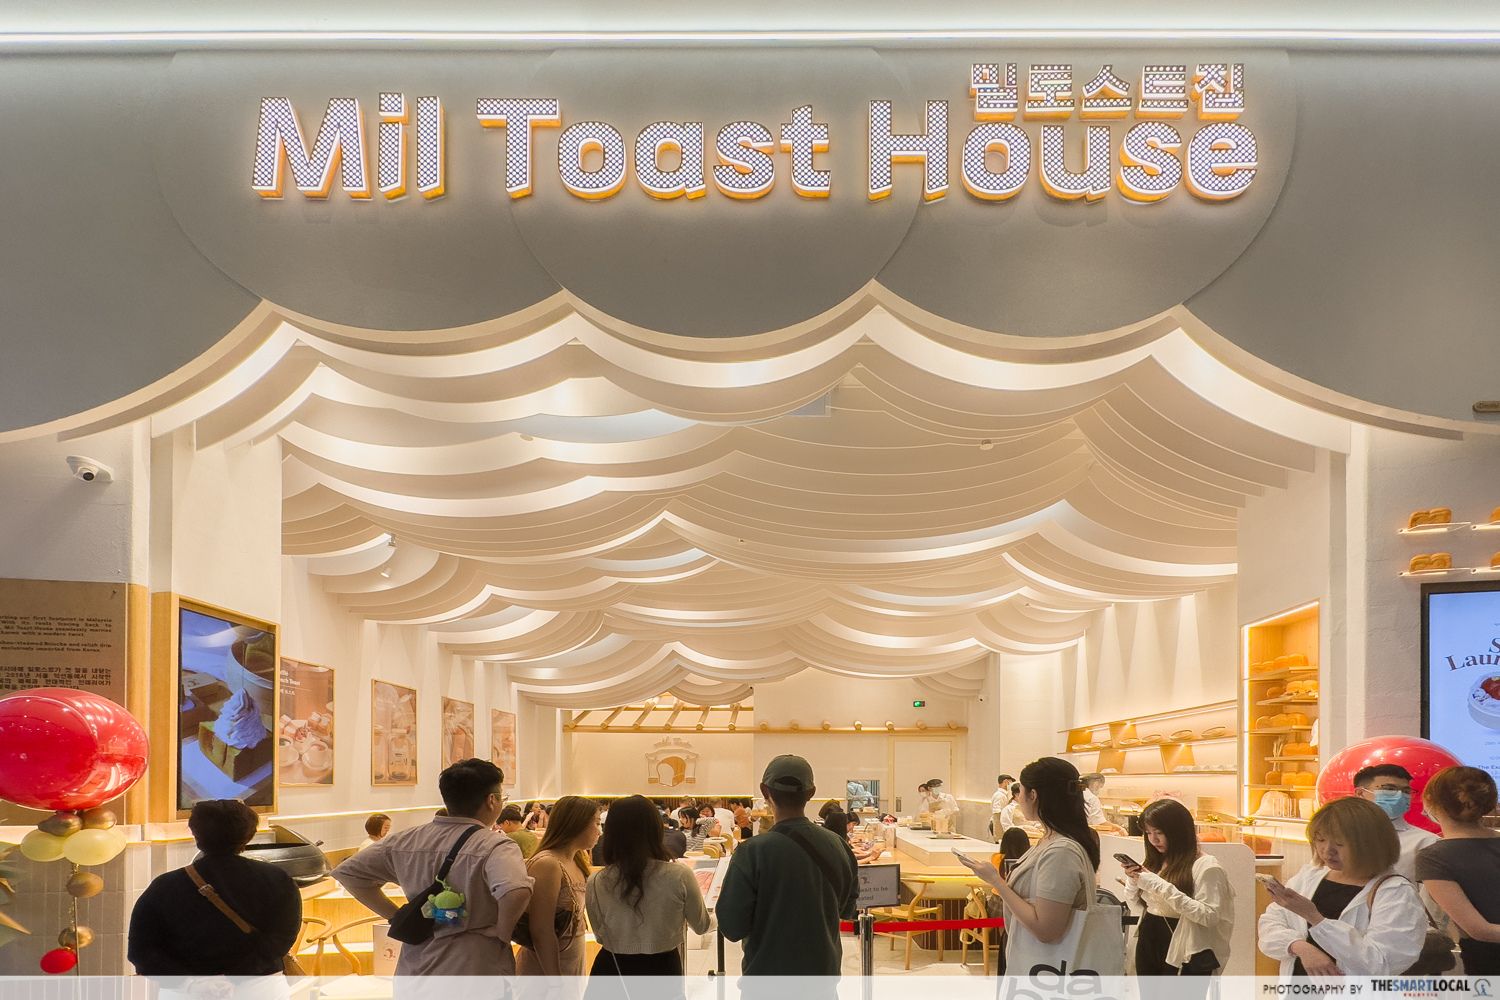 Mil toast house shopfront with a long queue